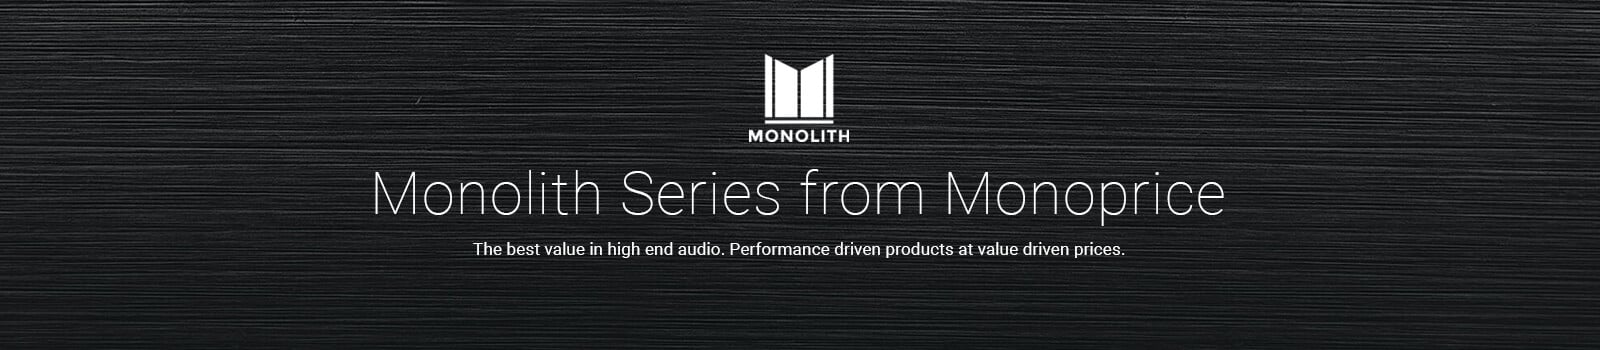 Monolith Series from Monoprice, The best value in high end audio, Performance driven products at value driven prices.